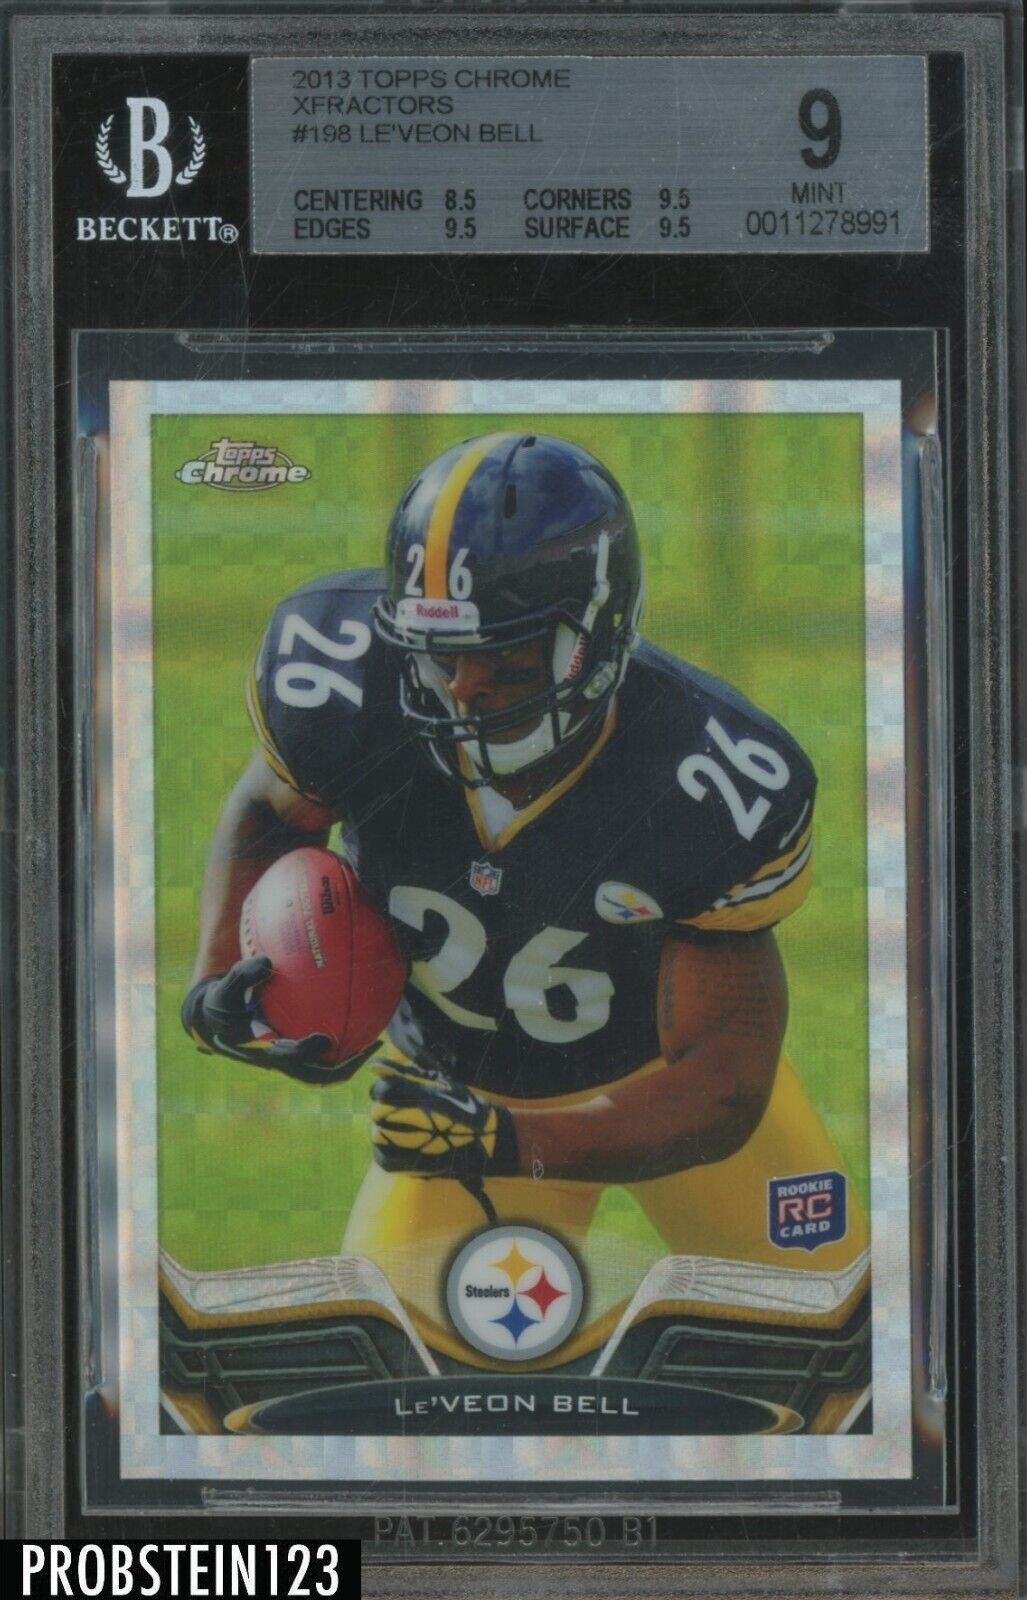 2013 Topps Chrome XFractor #198 Le'Veon Bell Steelers RC Rookie BGS 9